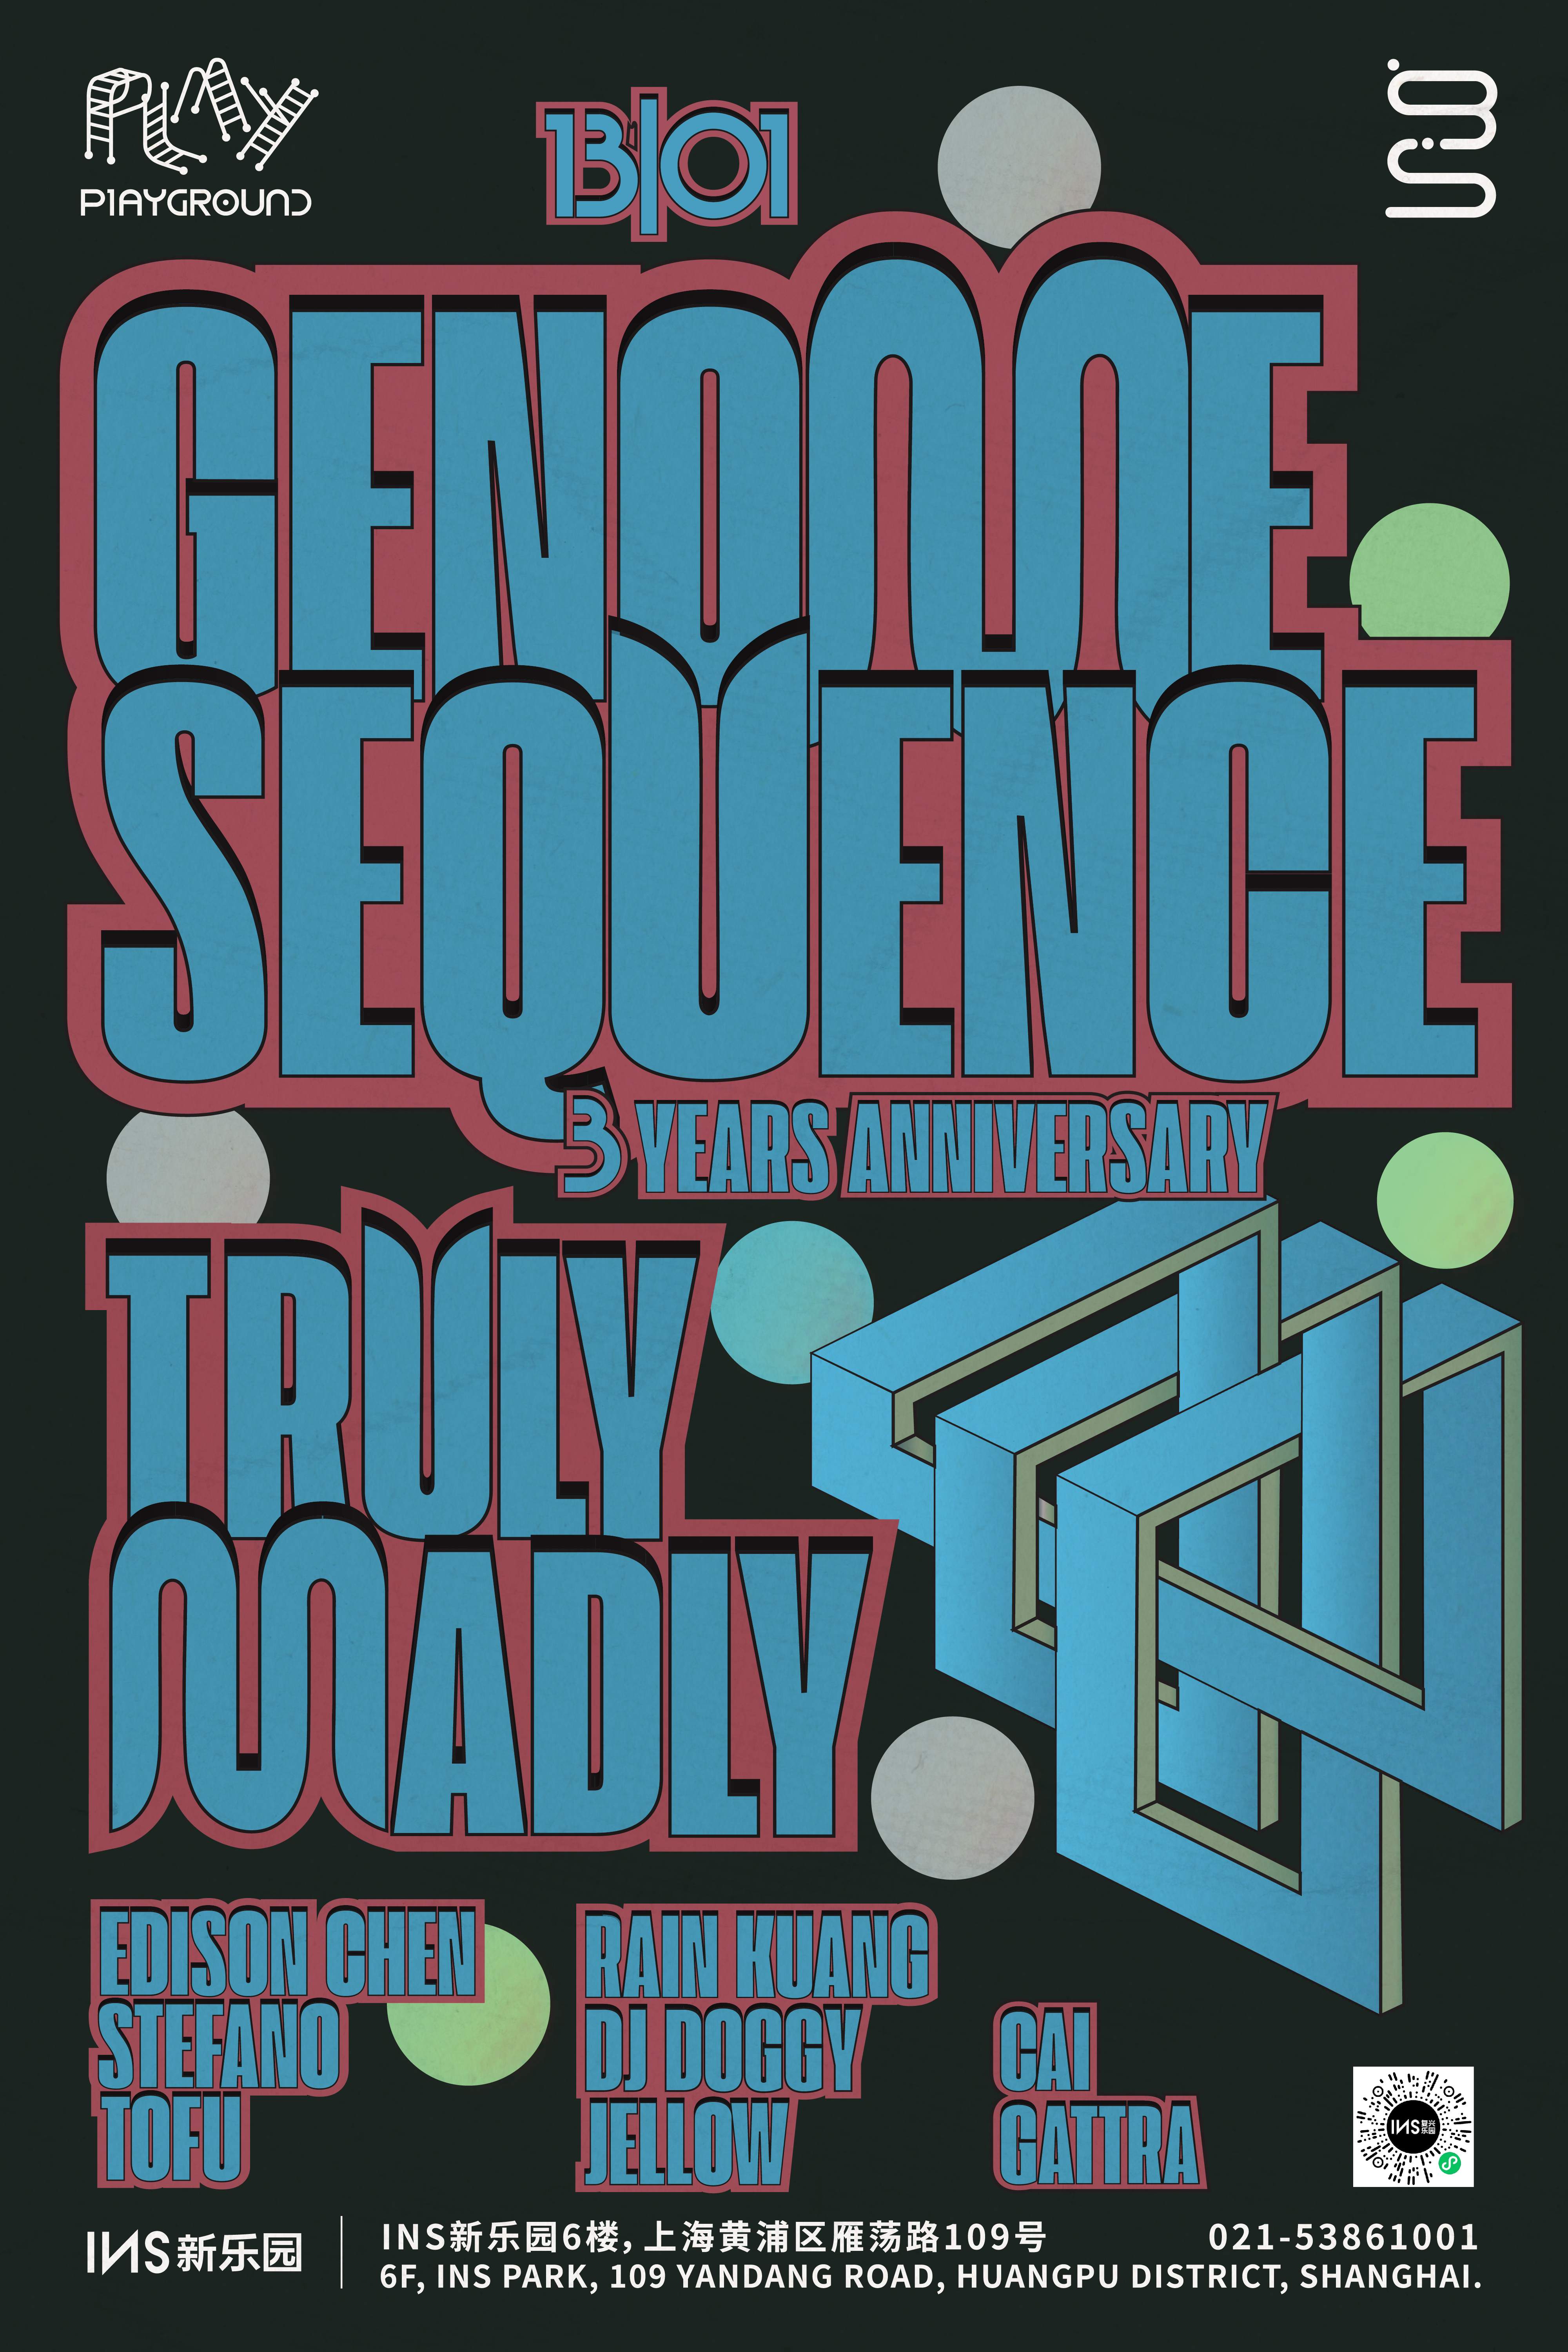 3 YEARS OF GENOM SEOUENCE PRSENT 'TURLY MADLY' - フライヤー表